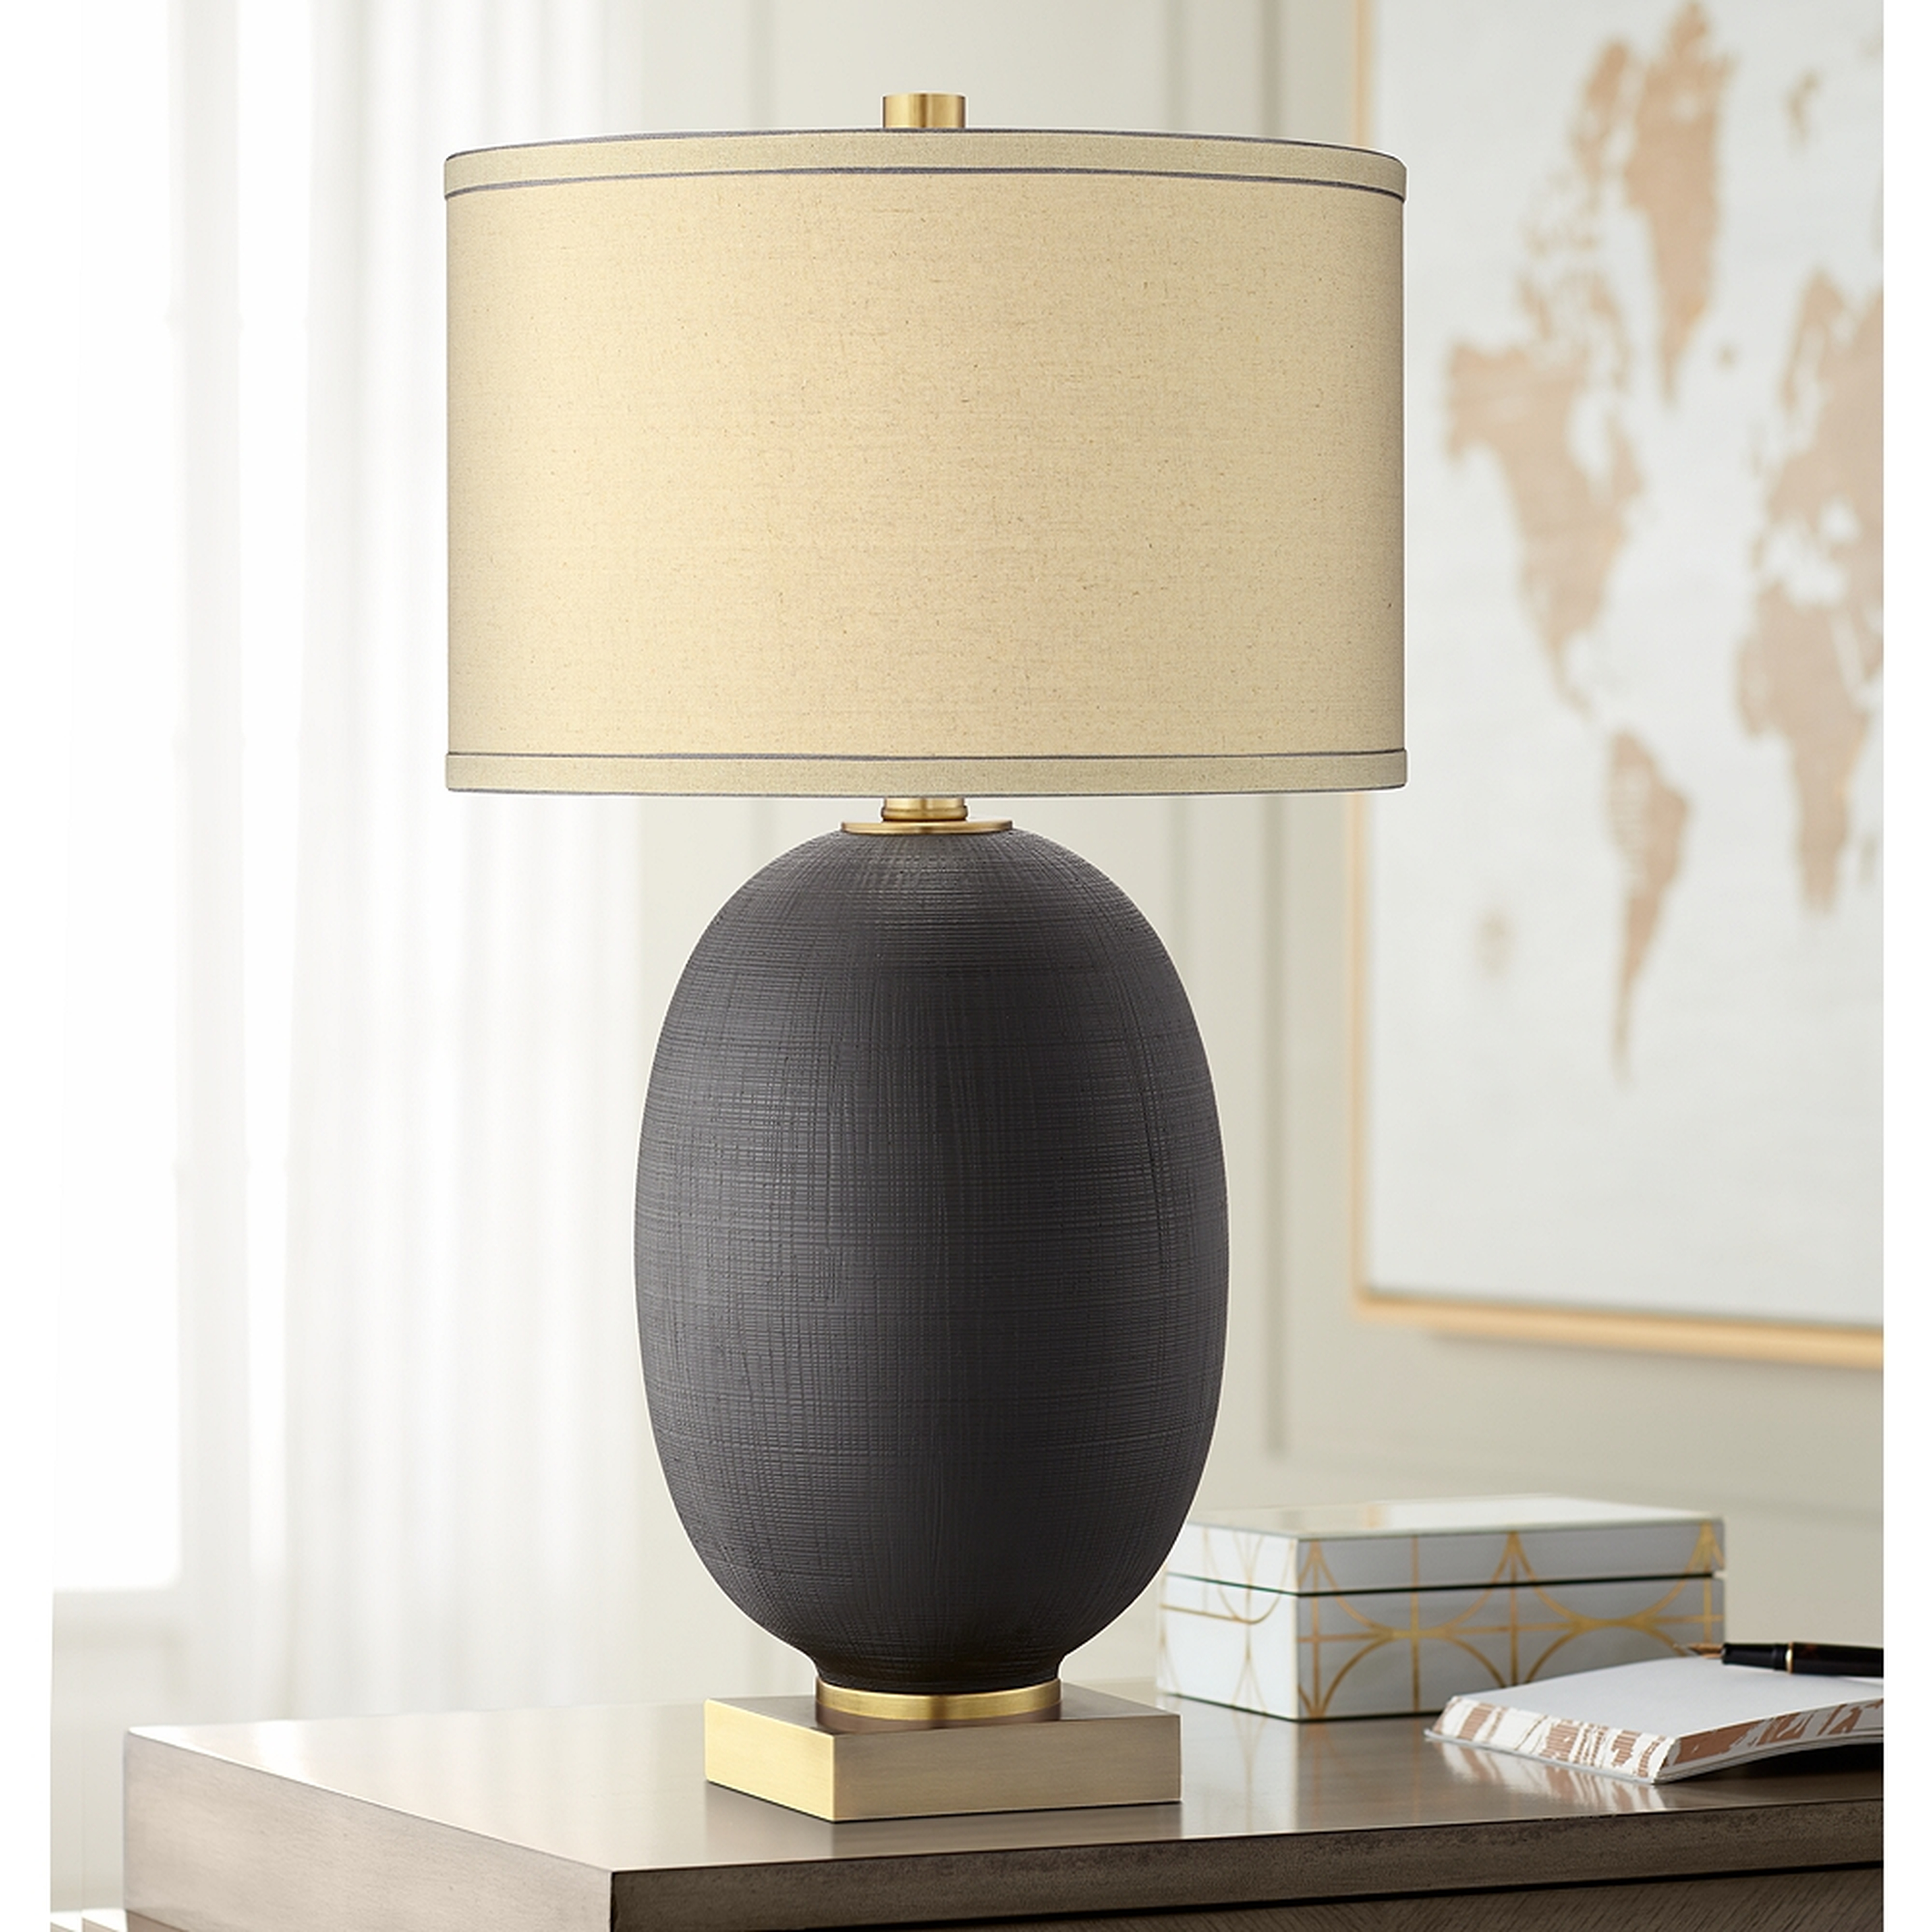 Hilo Black and Gold Oval Table Lamp - Style # 70X18 - Lamps Plus